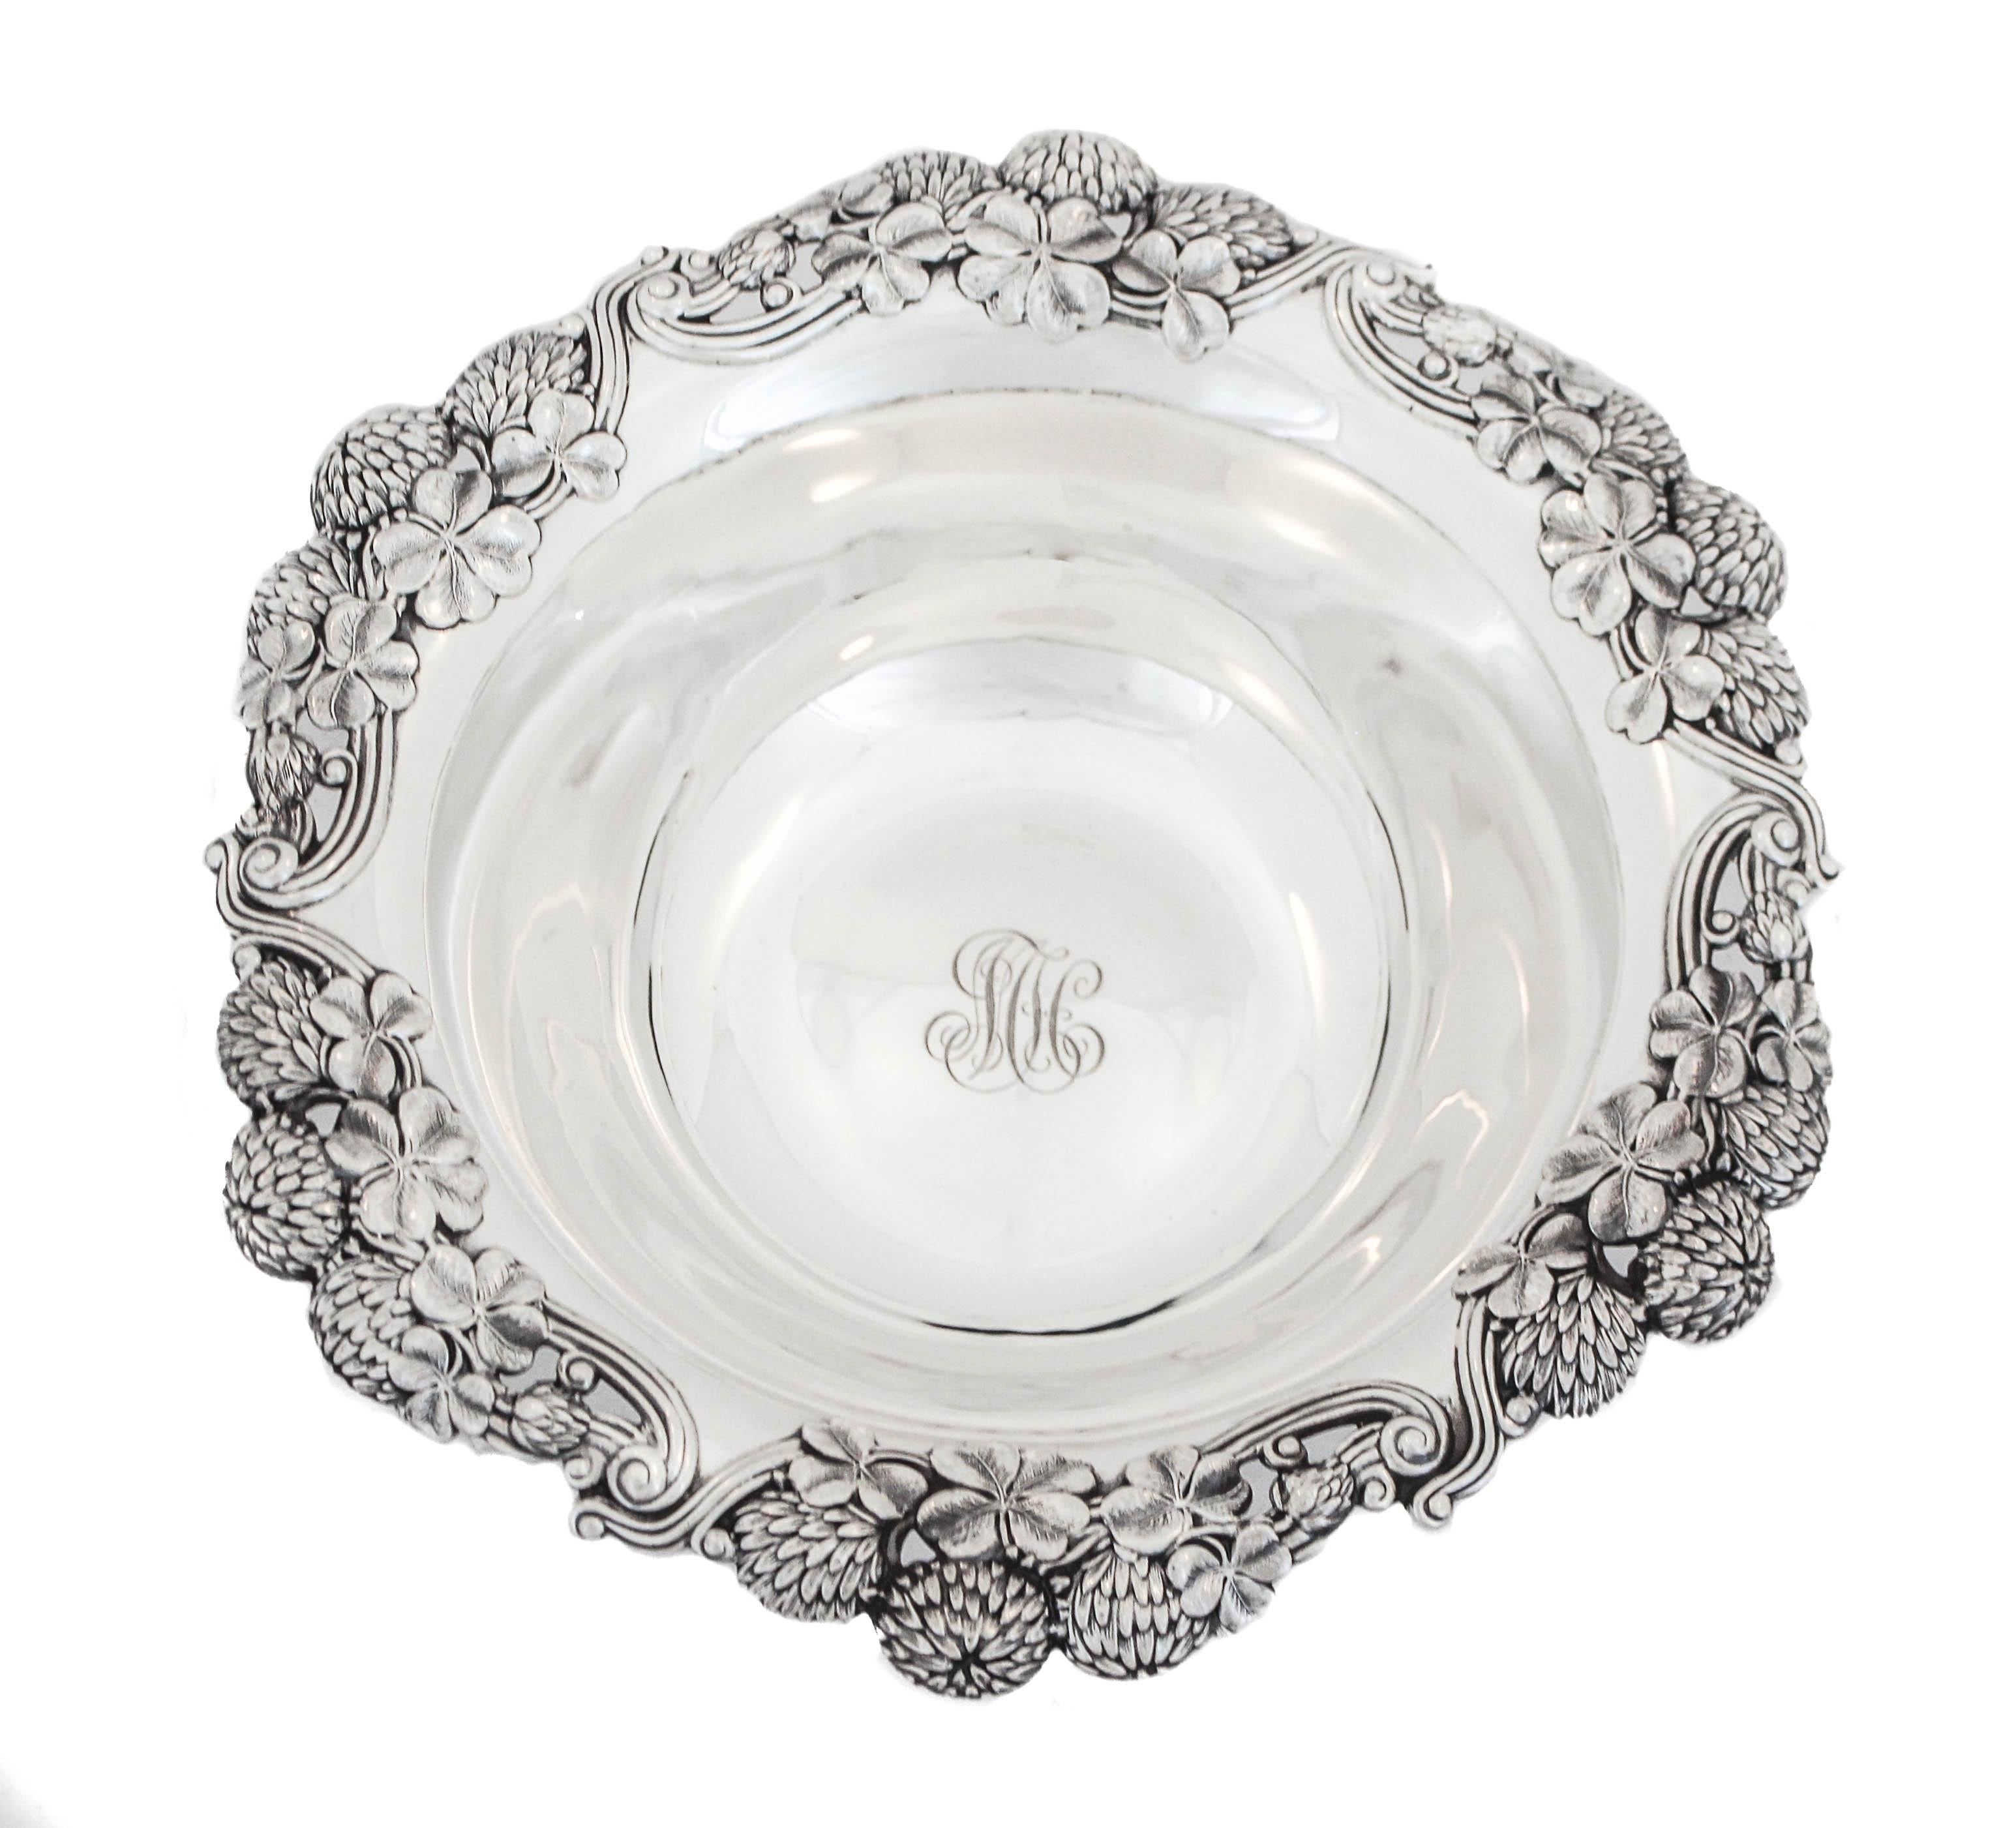 We are thrilled to offer you this sterling silver bowl made by the renowned Tiffany and Company. The bowl has a scalloped rim decorated with Chrysanthemums, clovers and pines. A rich mixture of natures bounties. In the center there is a hand